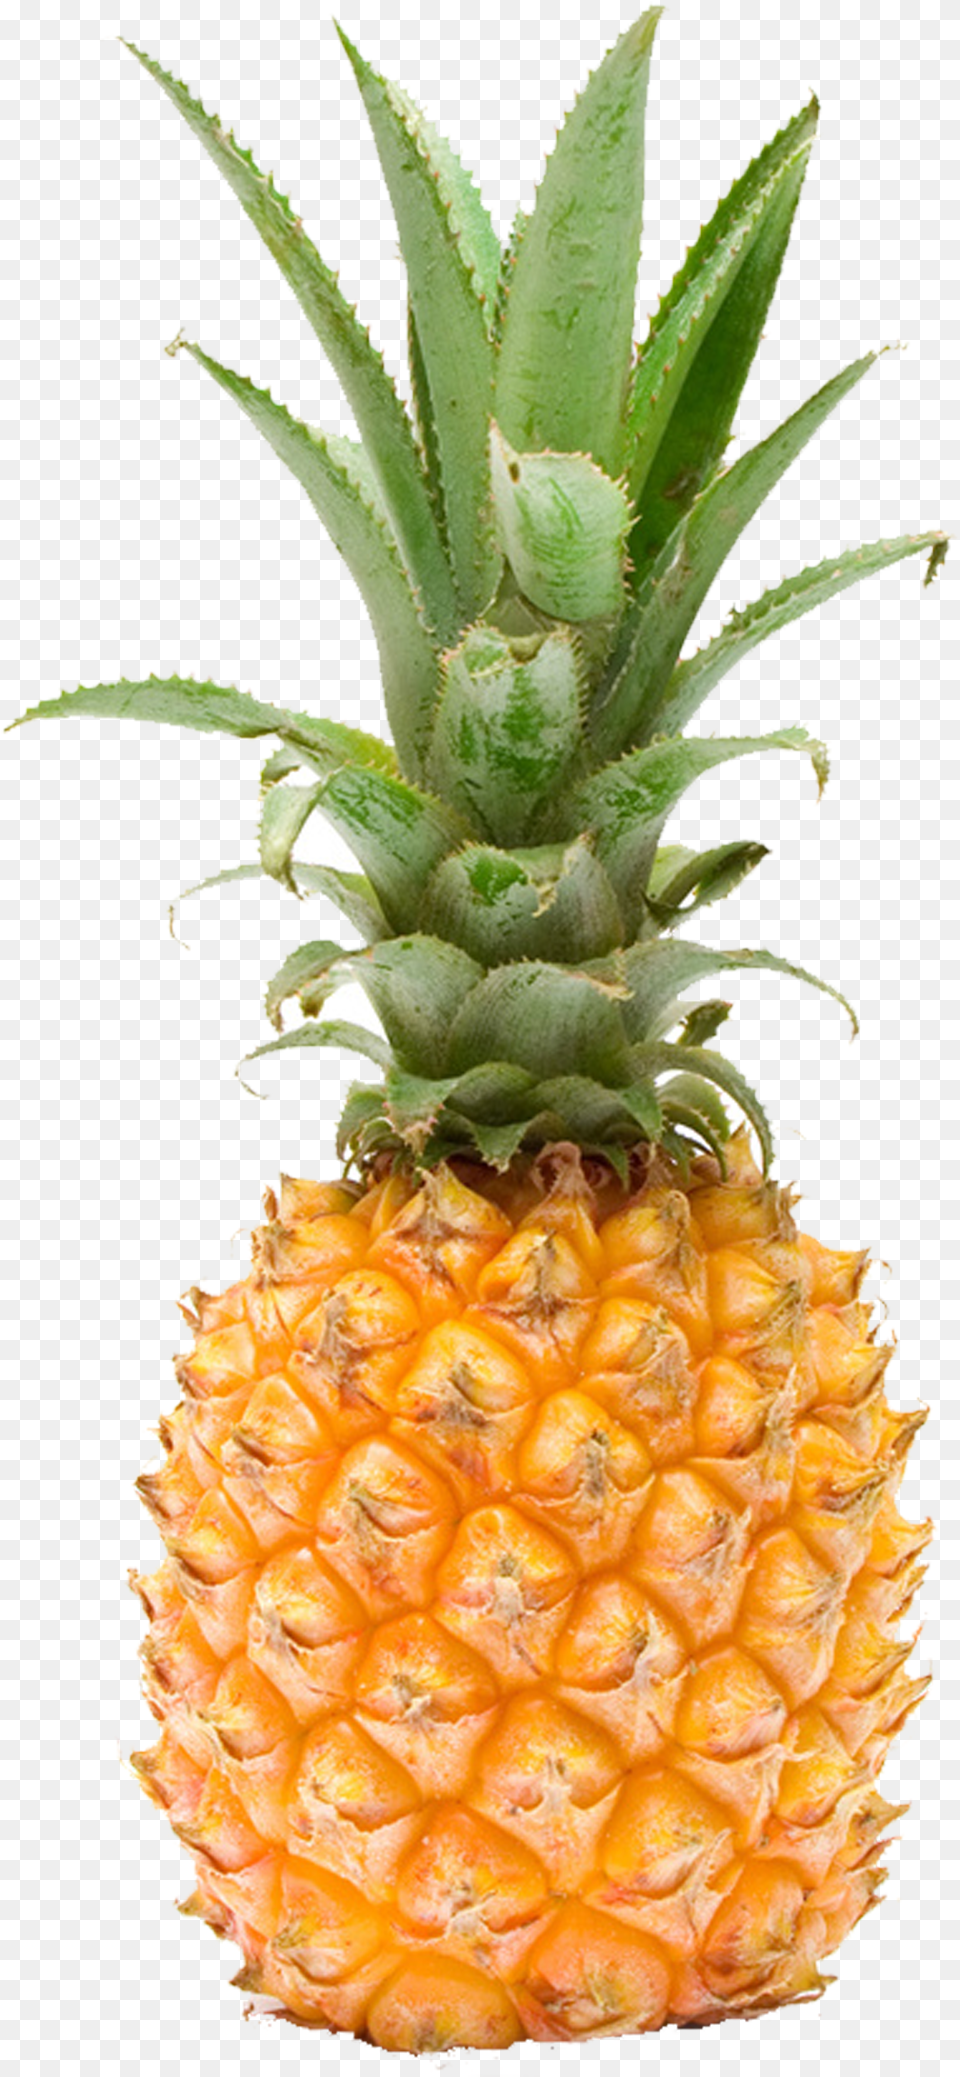 Pineapple Fruit Tall Pineapple, Food, Plant, Produce Free Transparent Png